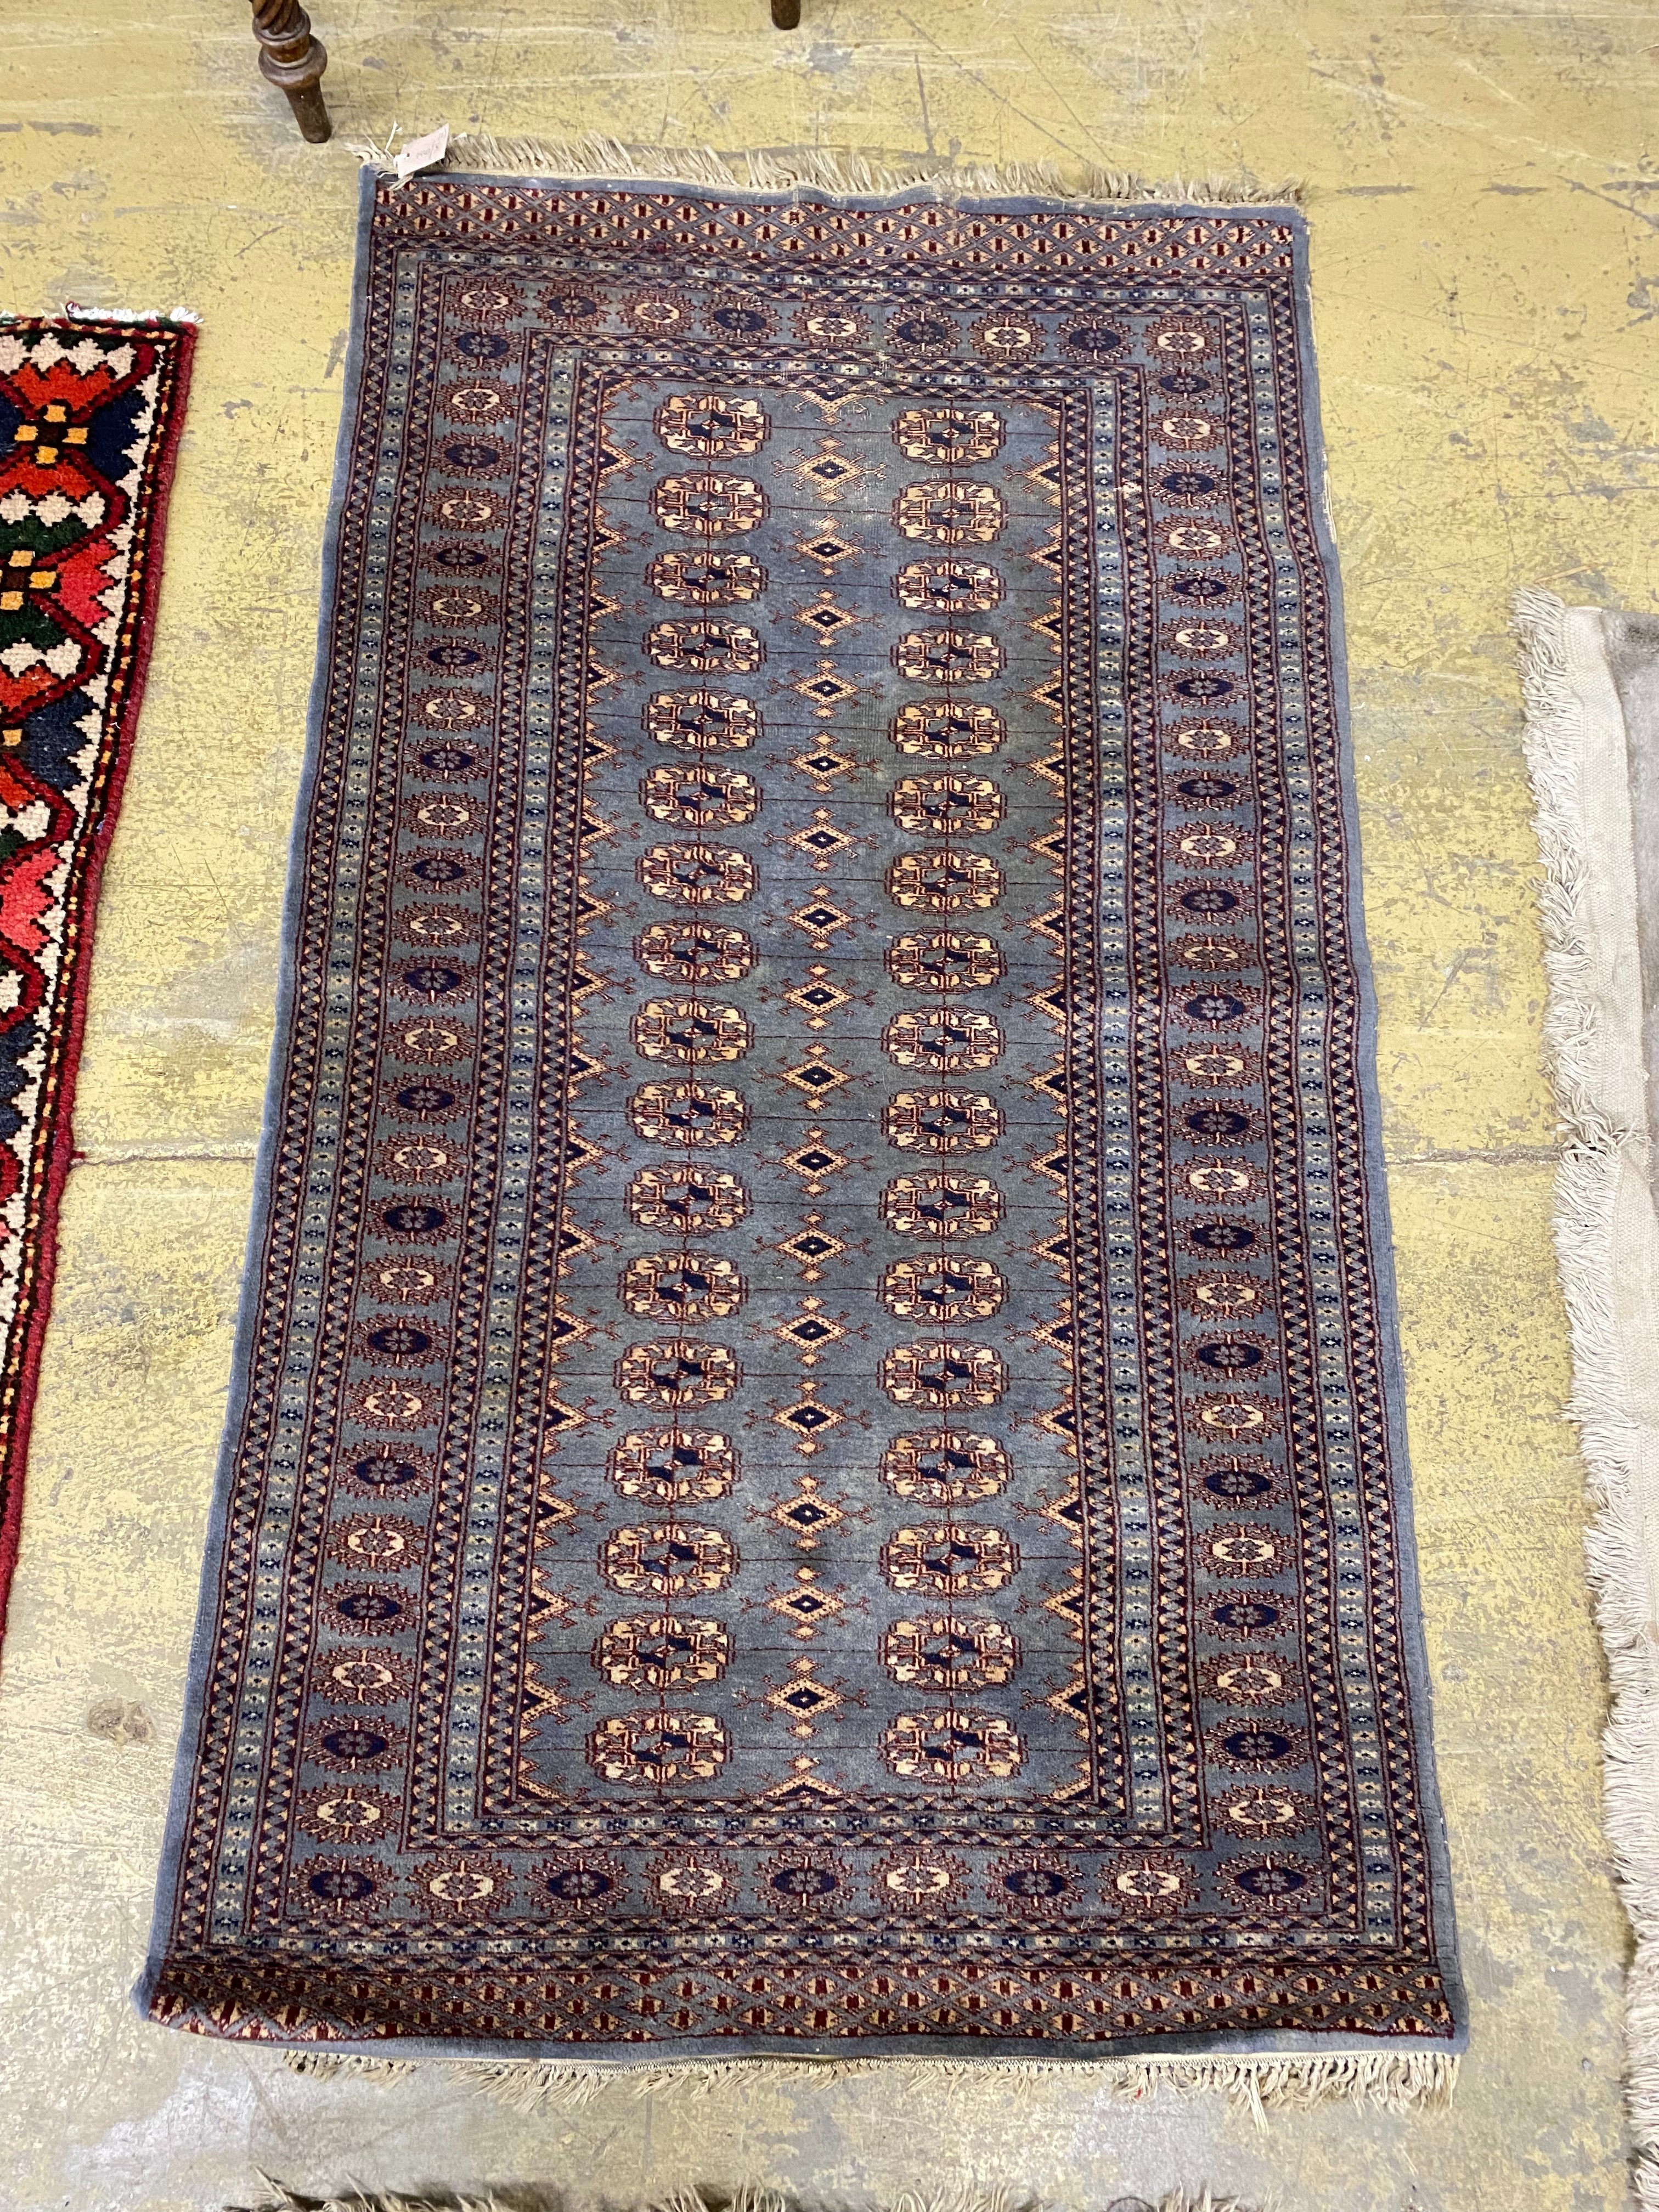 Two Bokhara rugs, largest 170 x 92cm